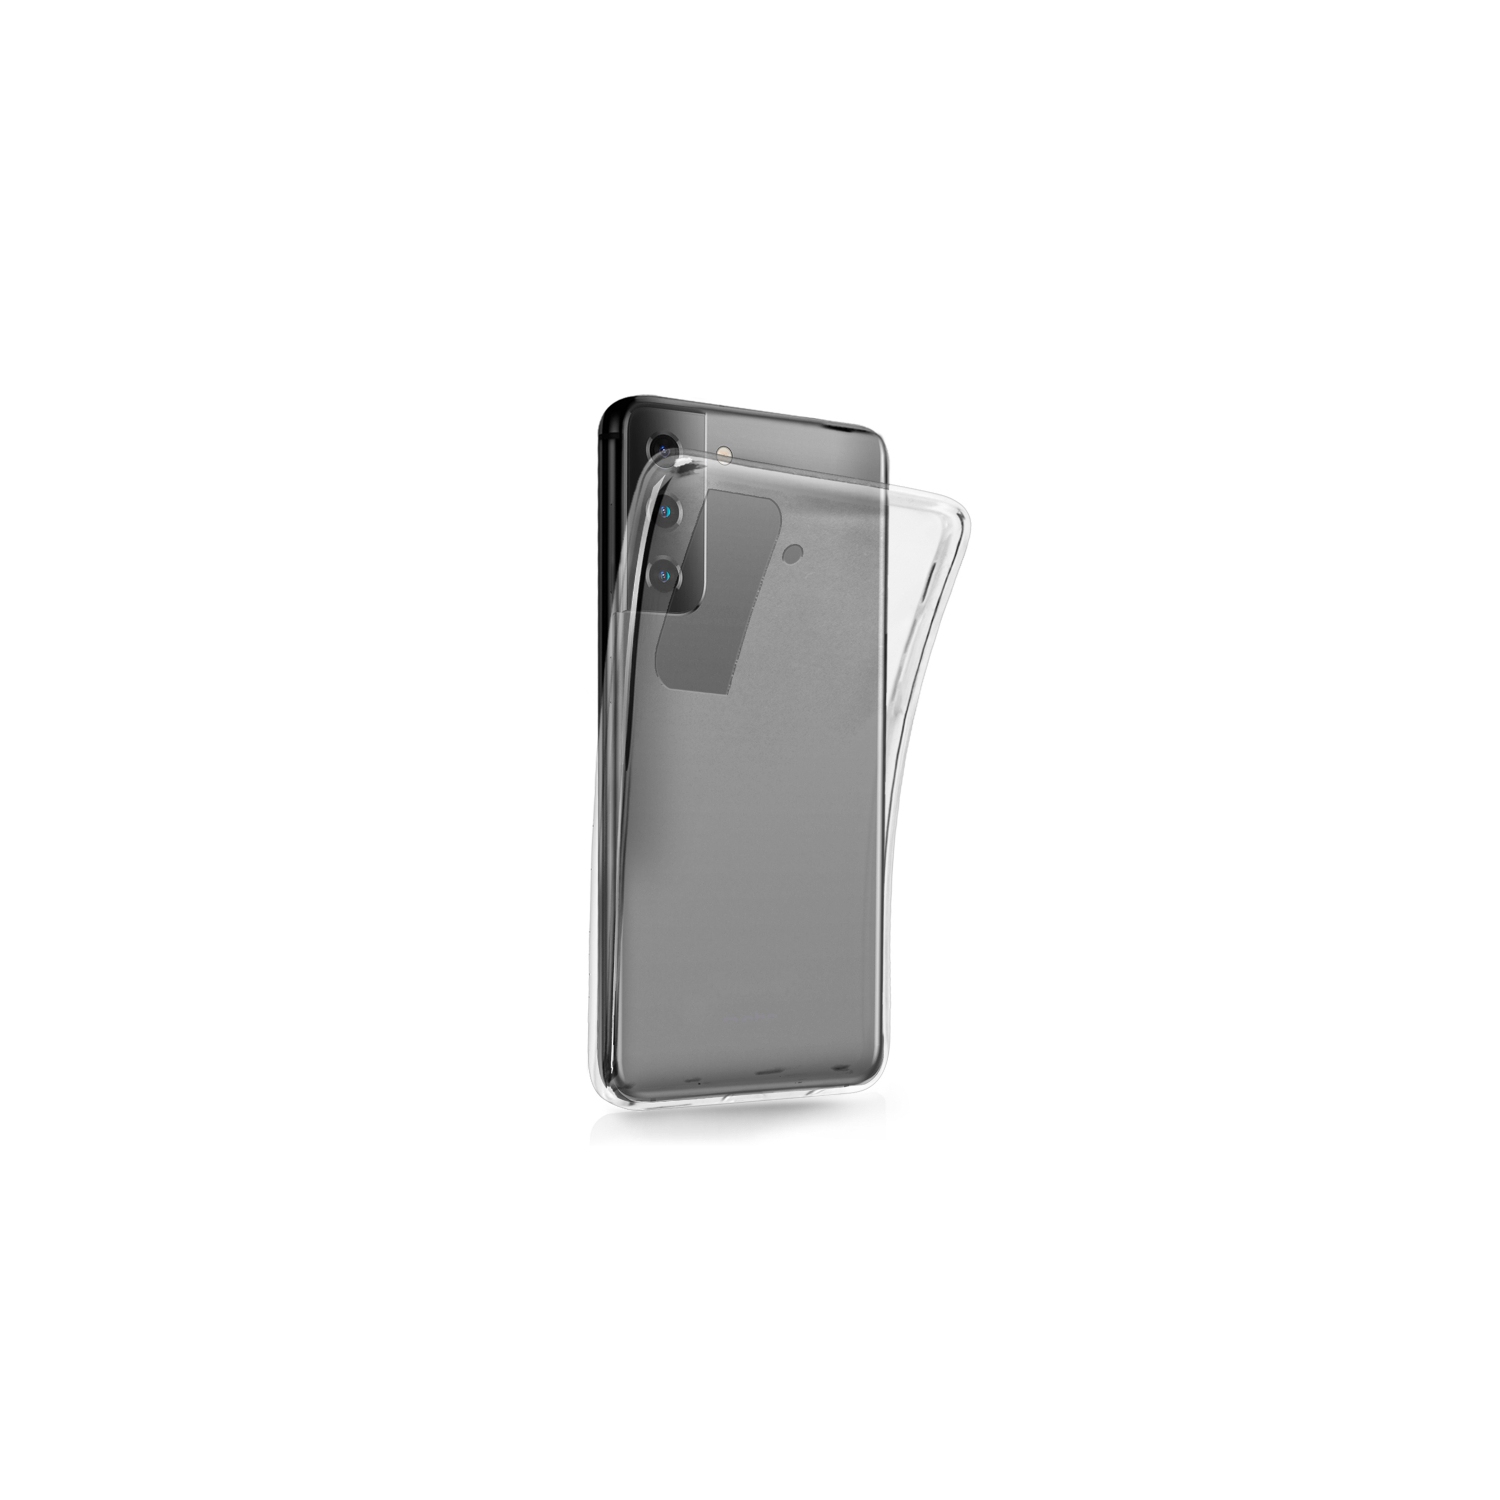 【CSmart】 Ultra Thin Soft TPU Silicone Jelly Bumper Back Cover Case for Samsung Galaxy S21 5G 6.2", Clear